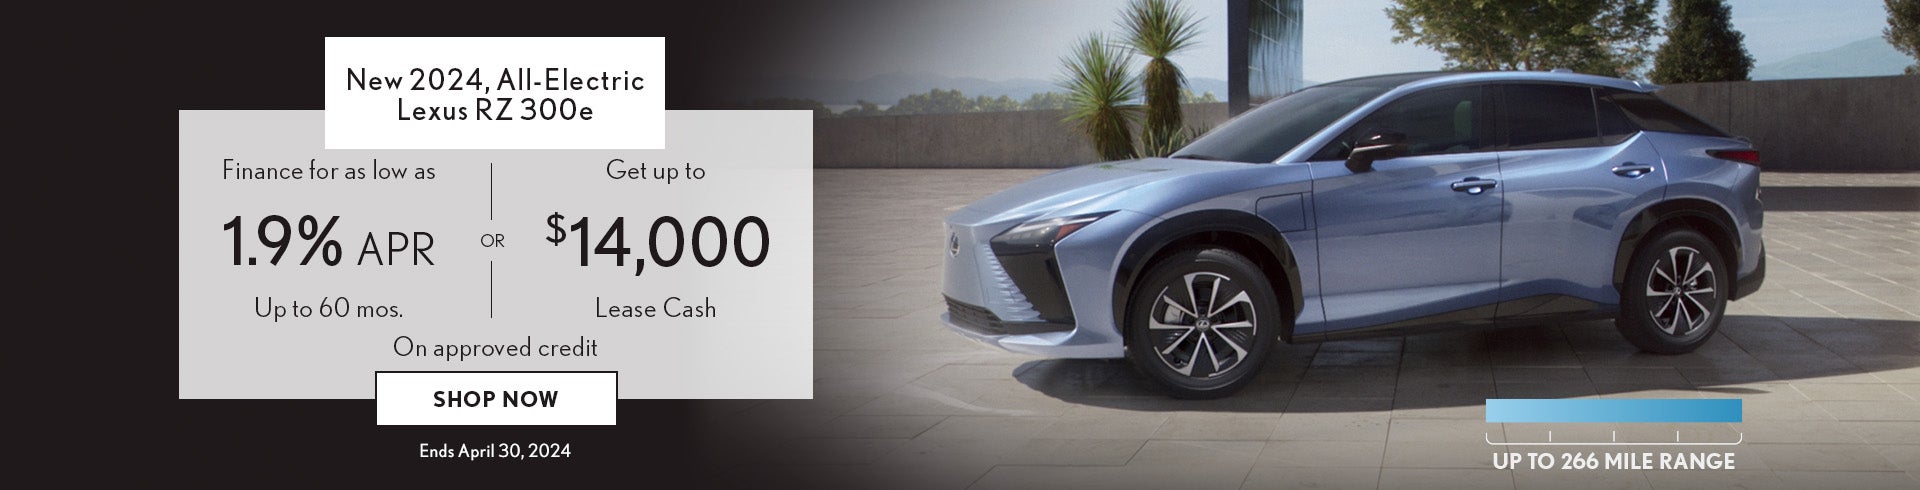 Finance or Lease a new 2024 All-Electric Lexus RZ 300e